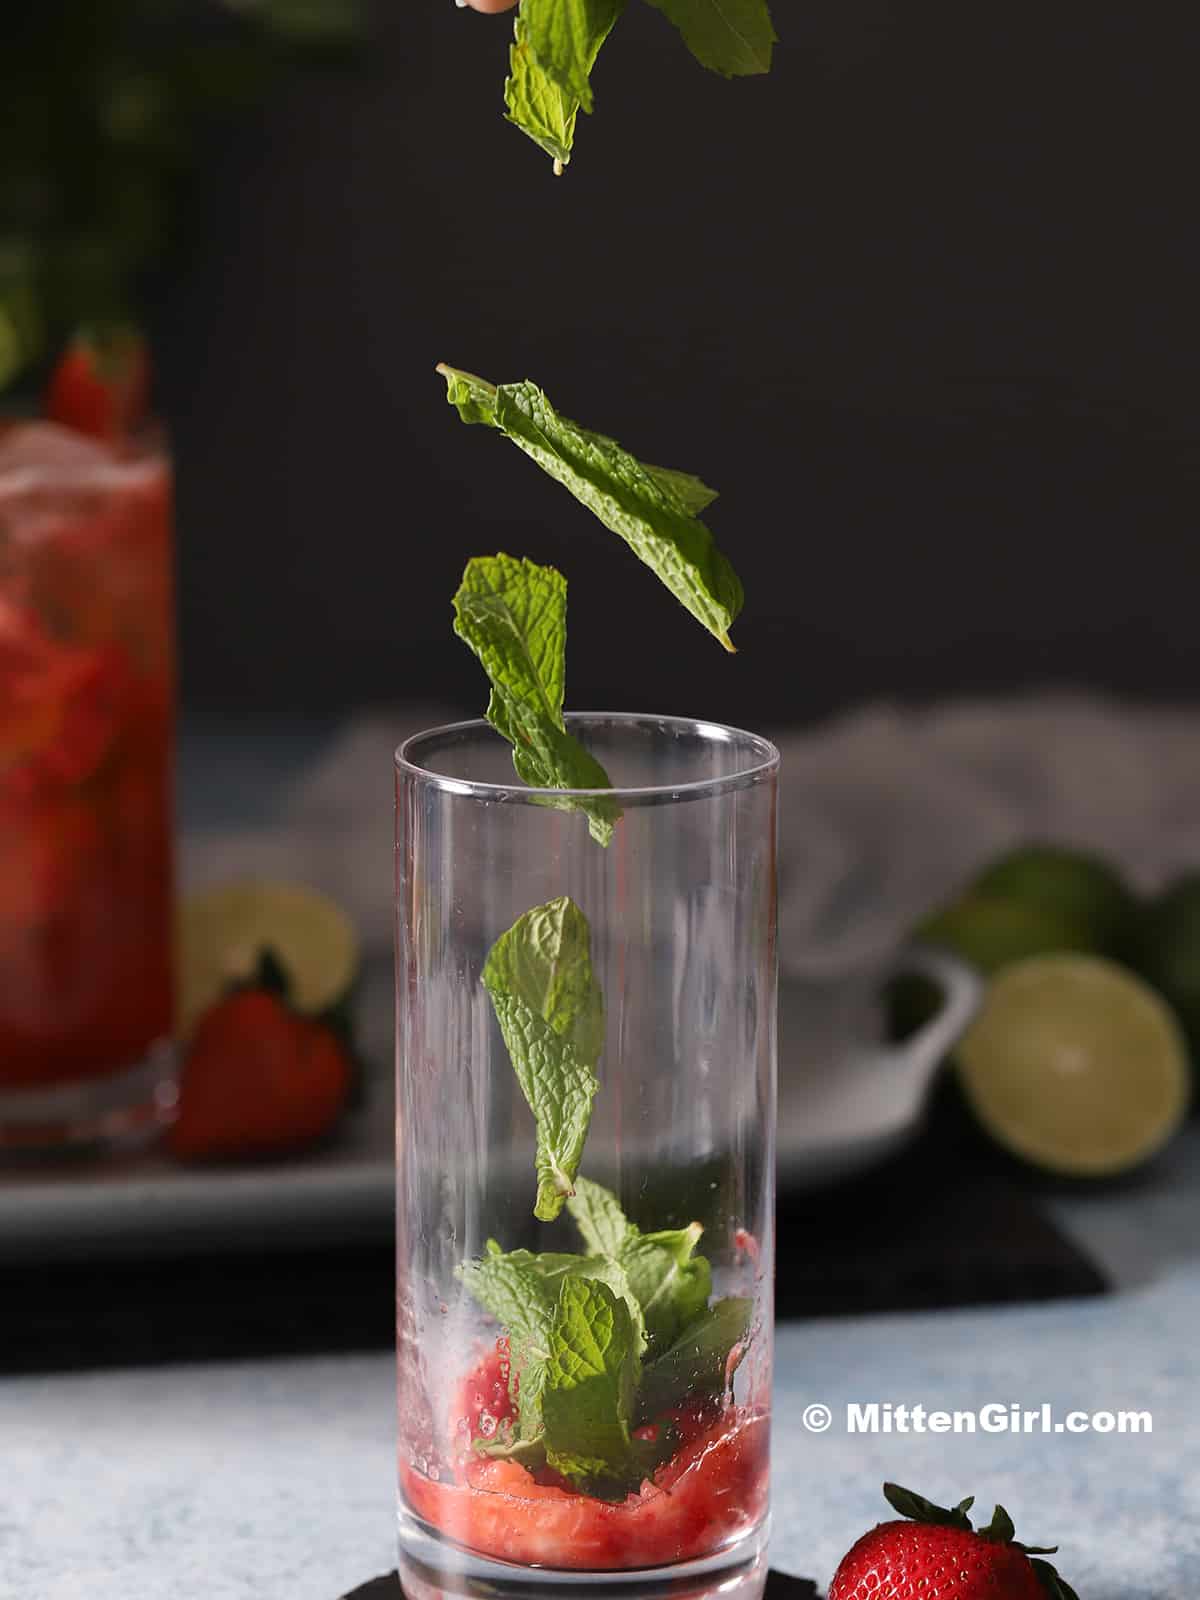 Mint leaves falling into a tall glass.